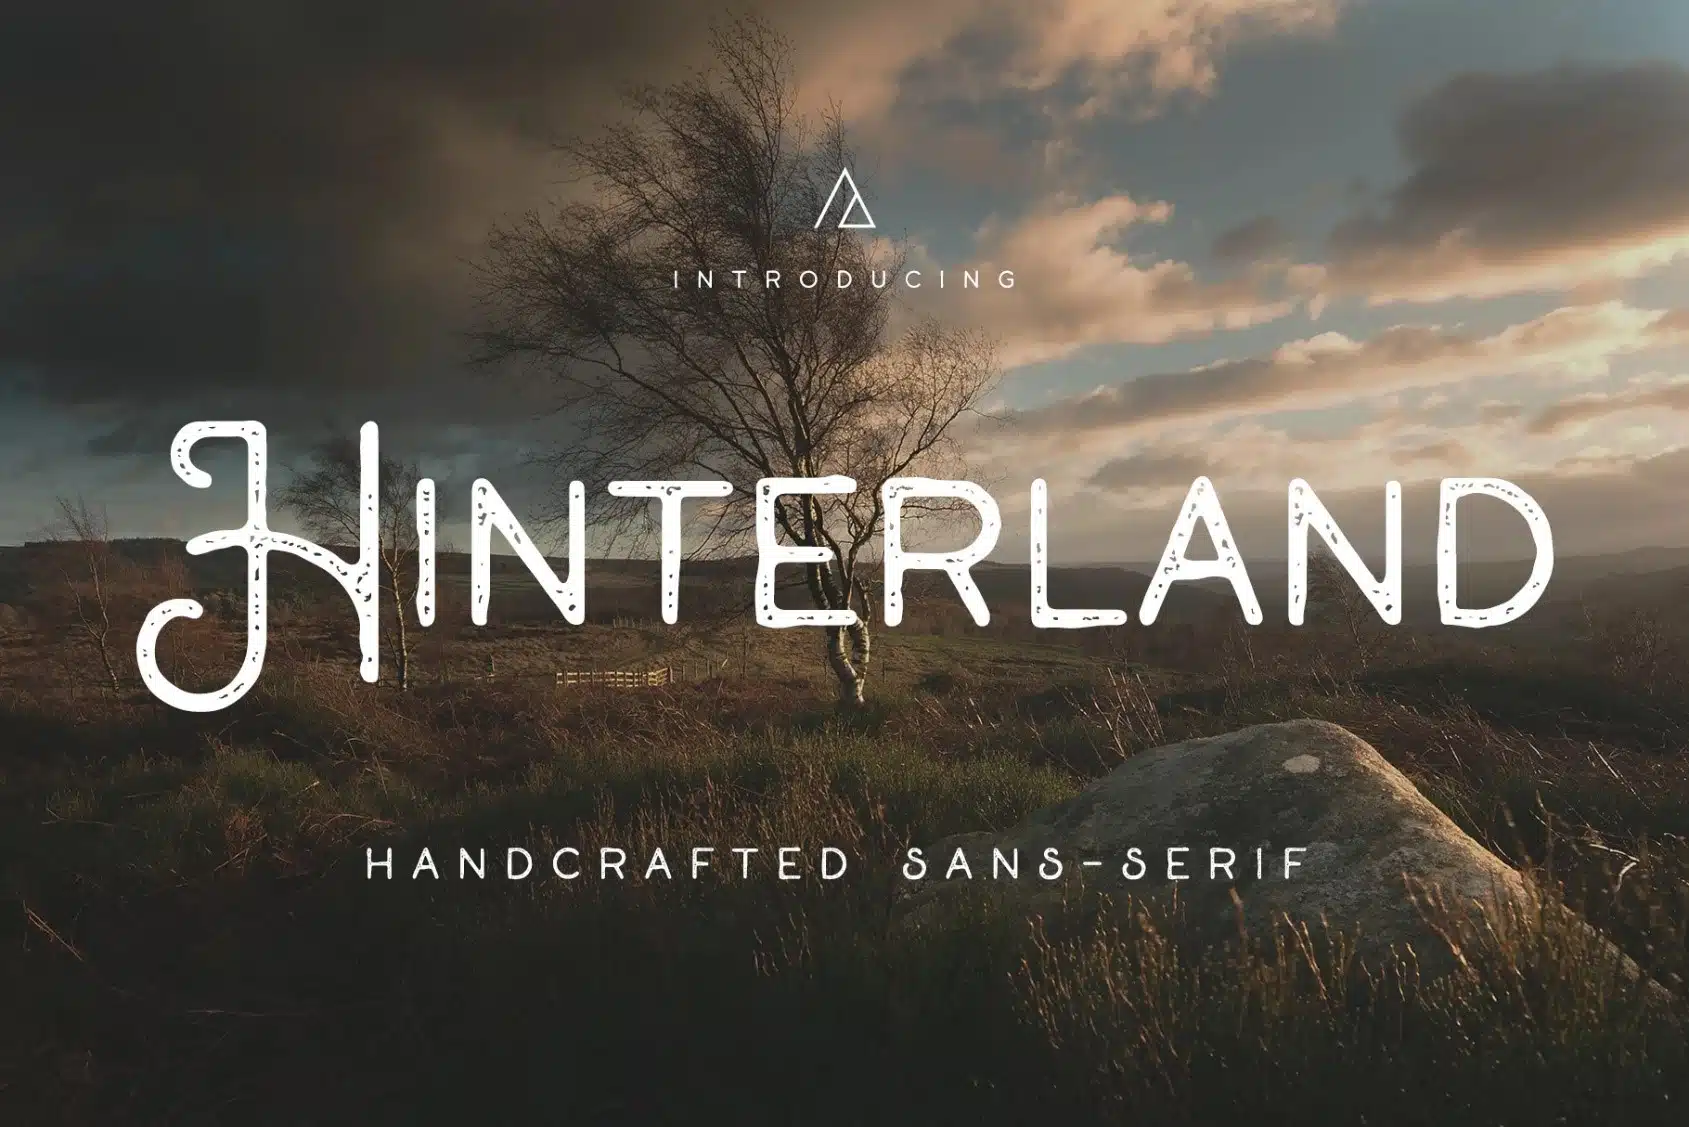 Handcrafted sans serif Hunting Font